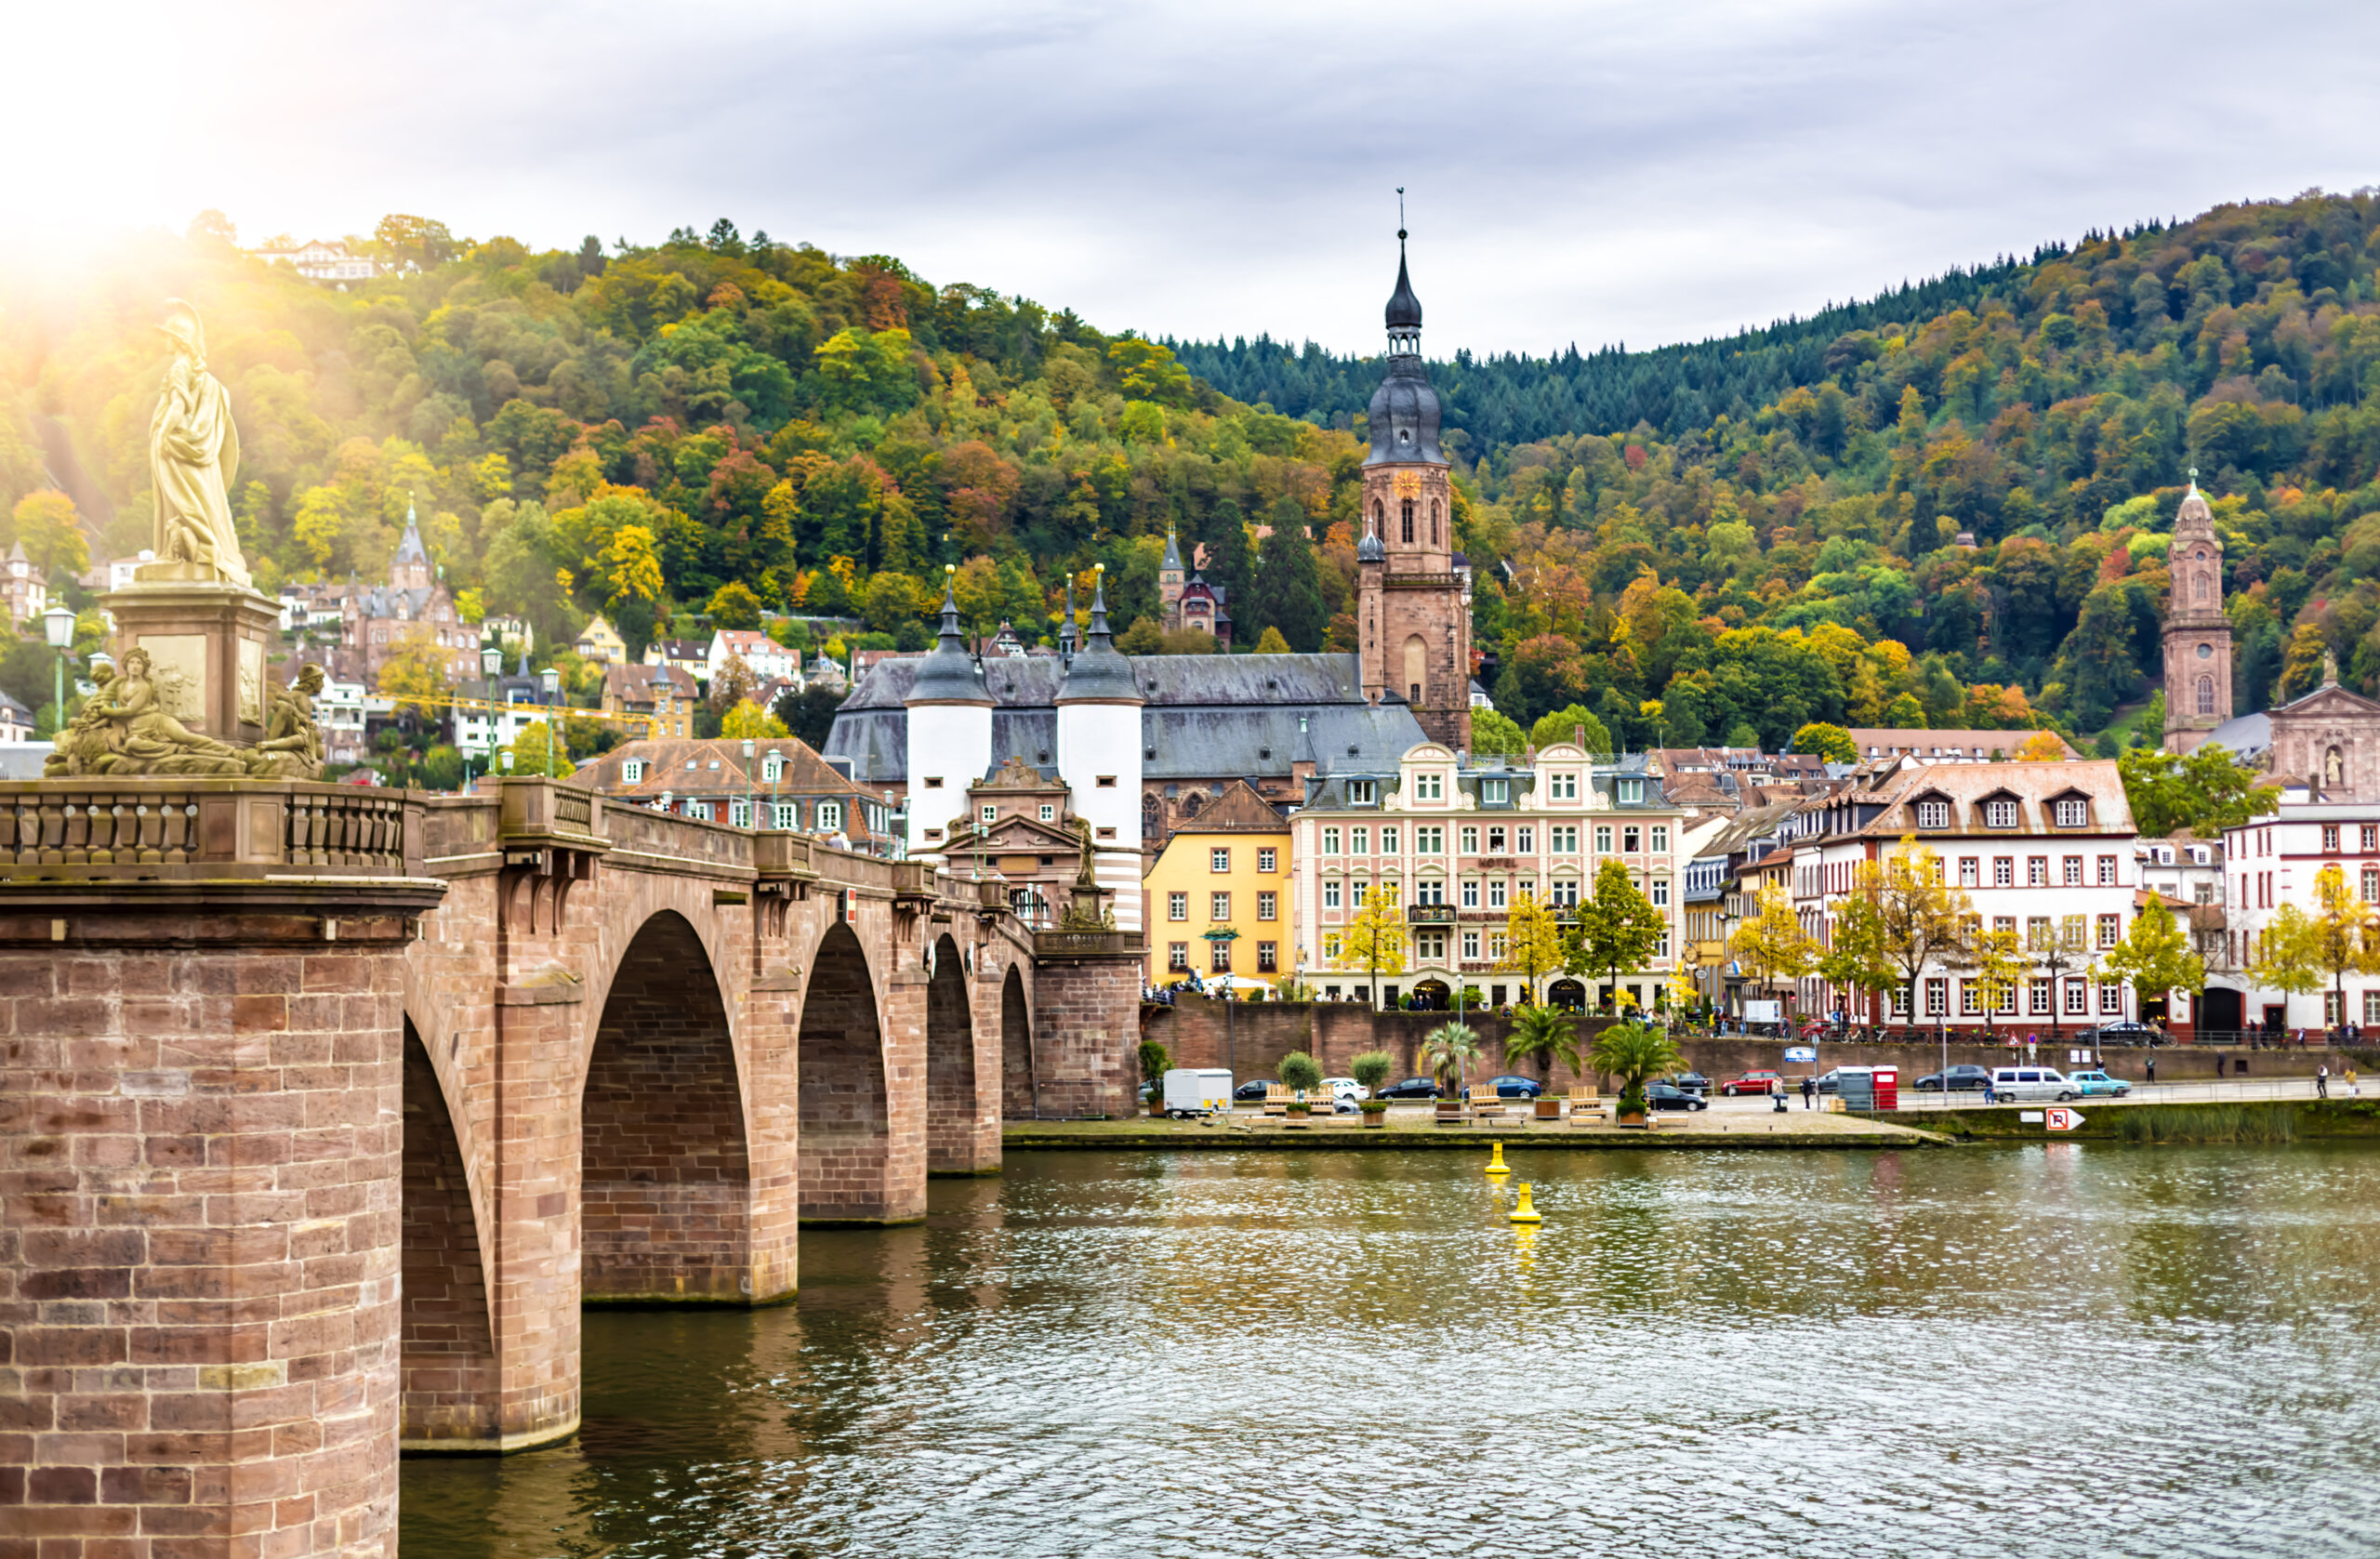 The Karl Theodor Bridge - known also as the Old Bridge - running through the Neckar River in the city of Heidelberg, Germany.